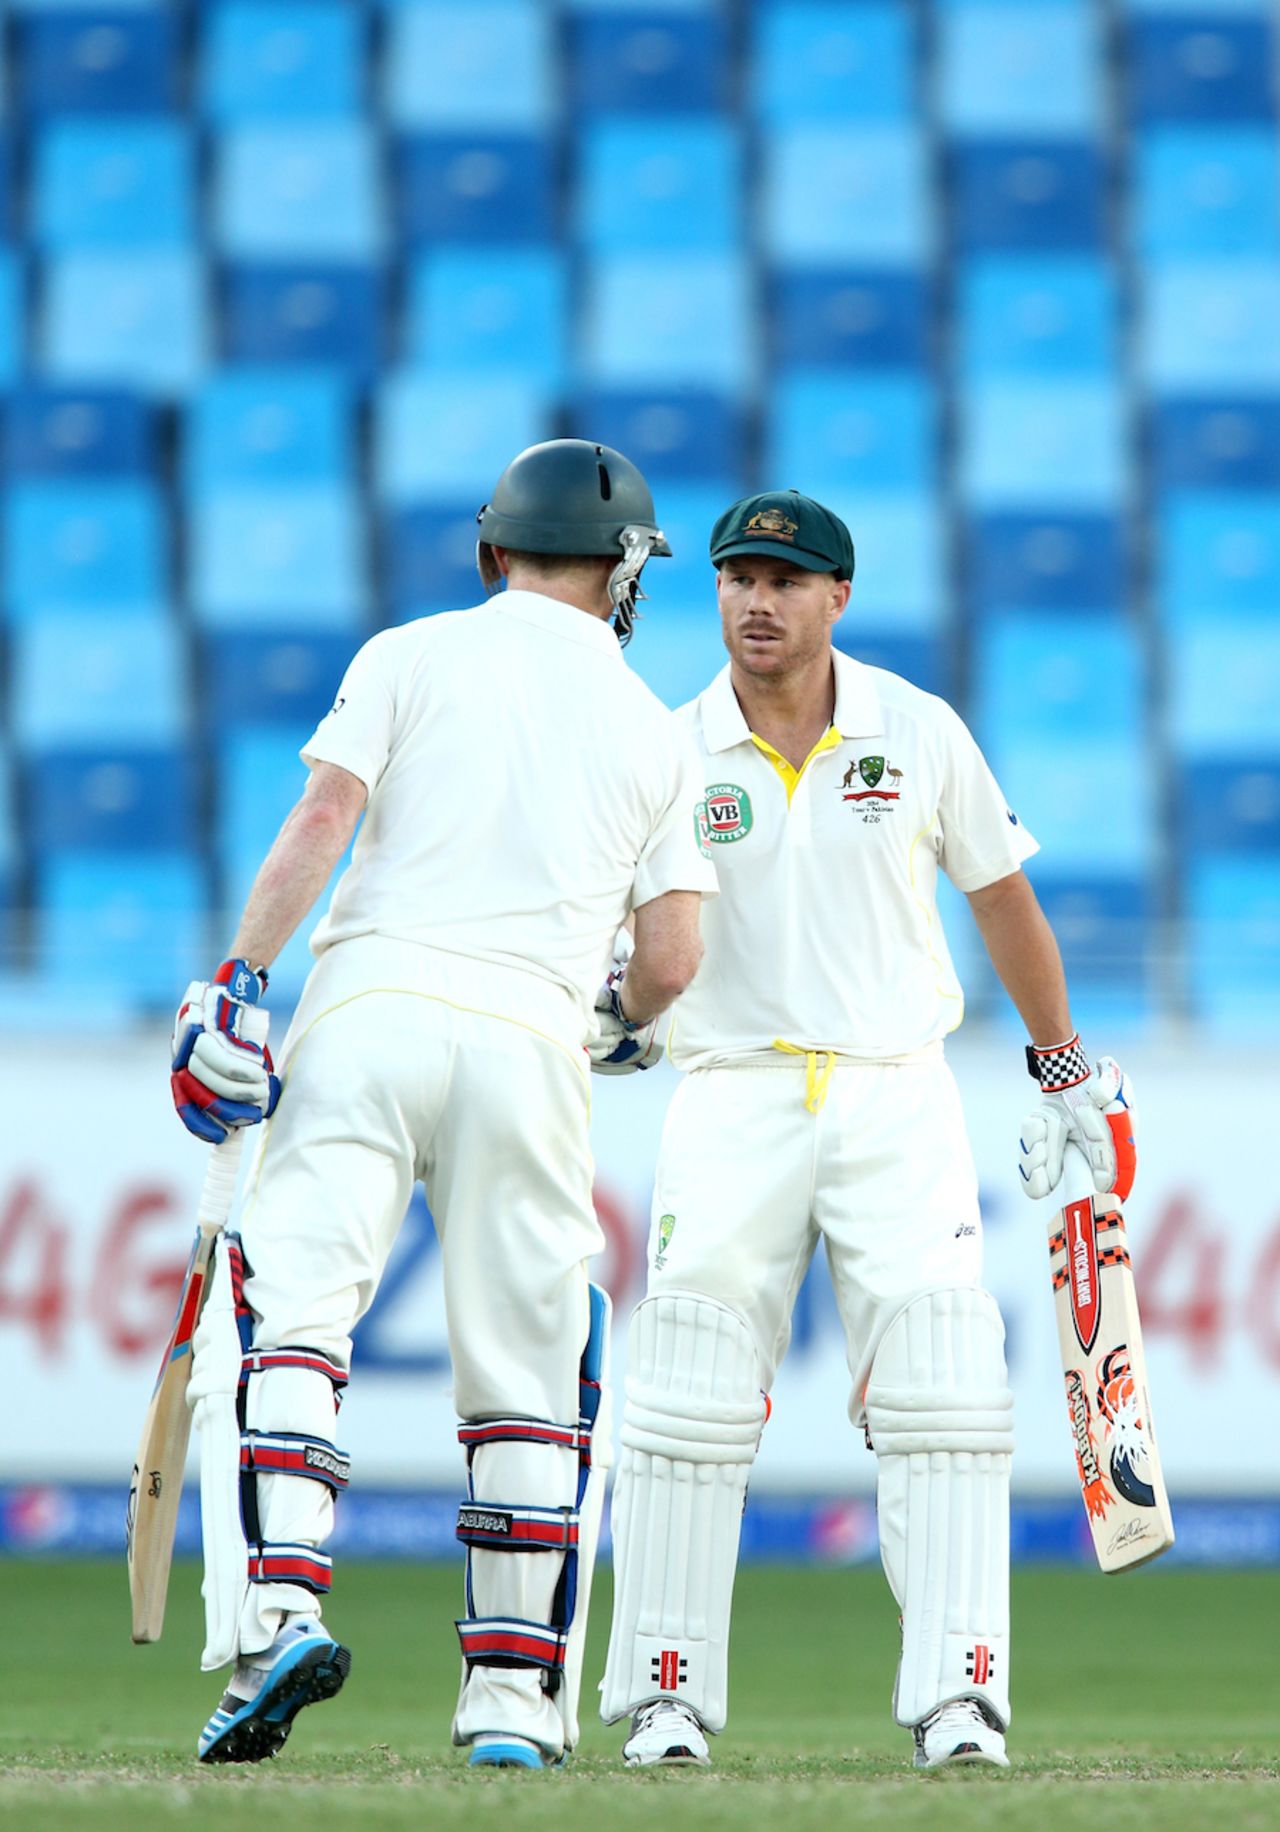 Nice to meet you: Chris Rogers congratulates David Warner for his fifty, Pakistan v Australia, 1st Test, Dubai, 2nd day, October 23, 2014